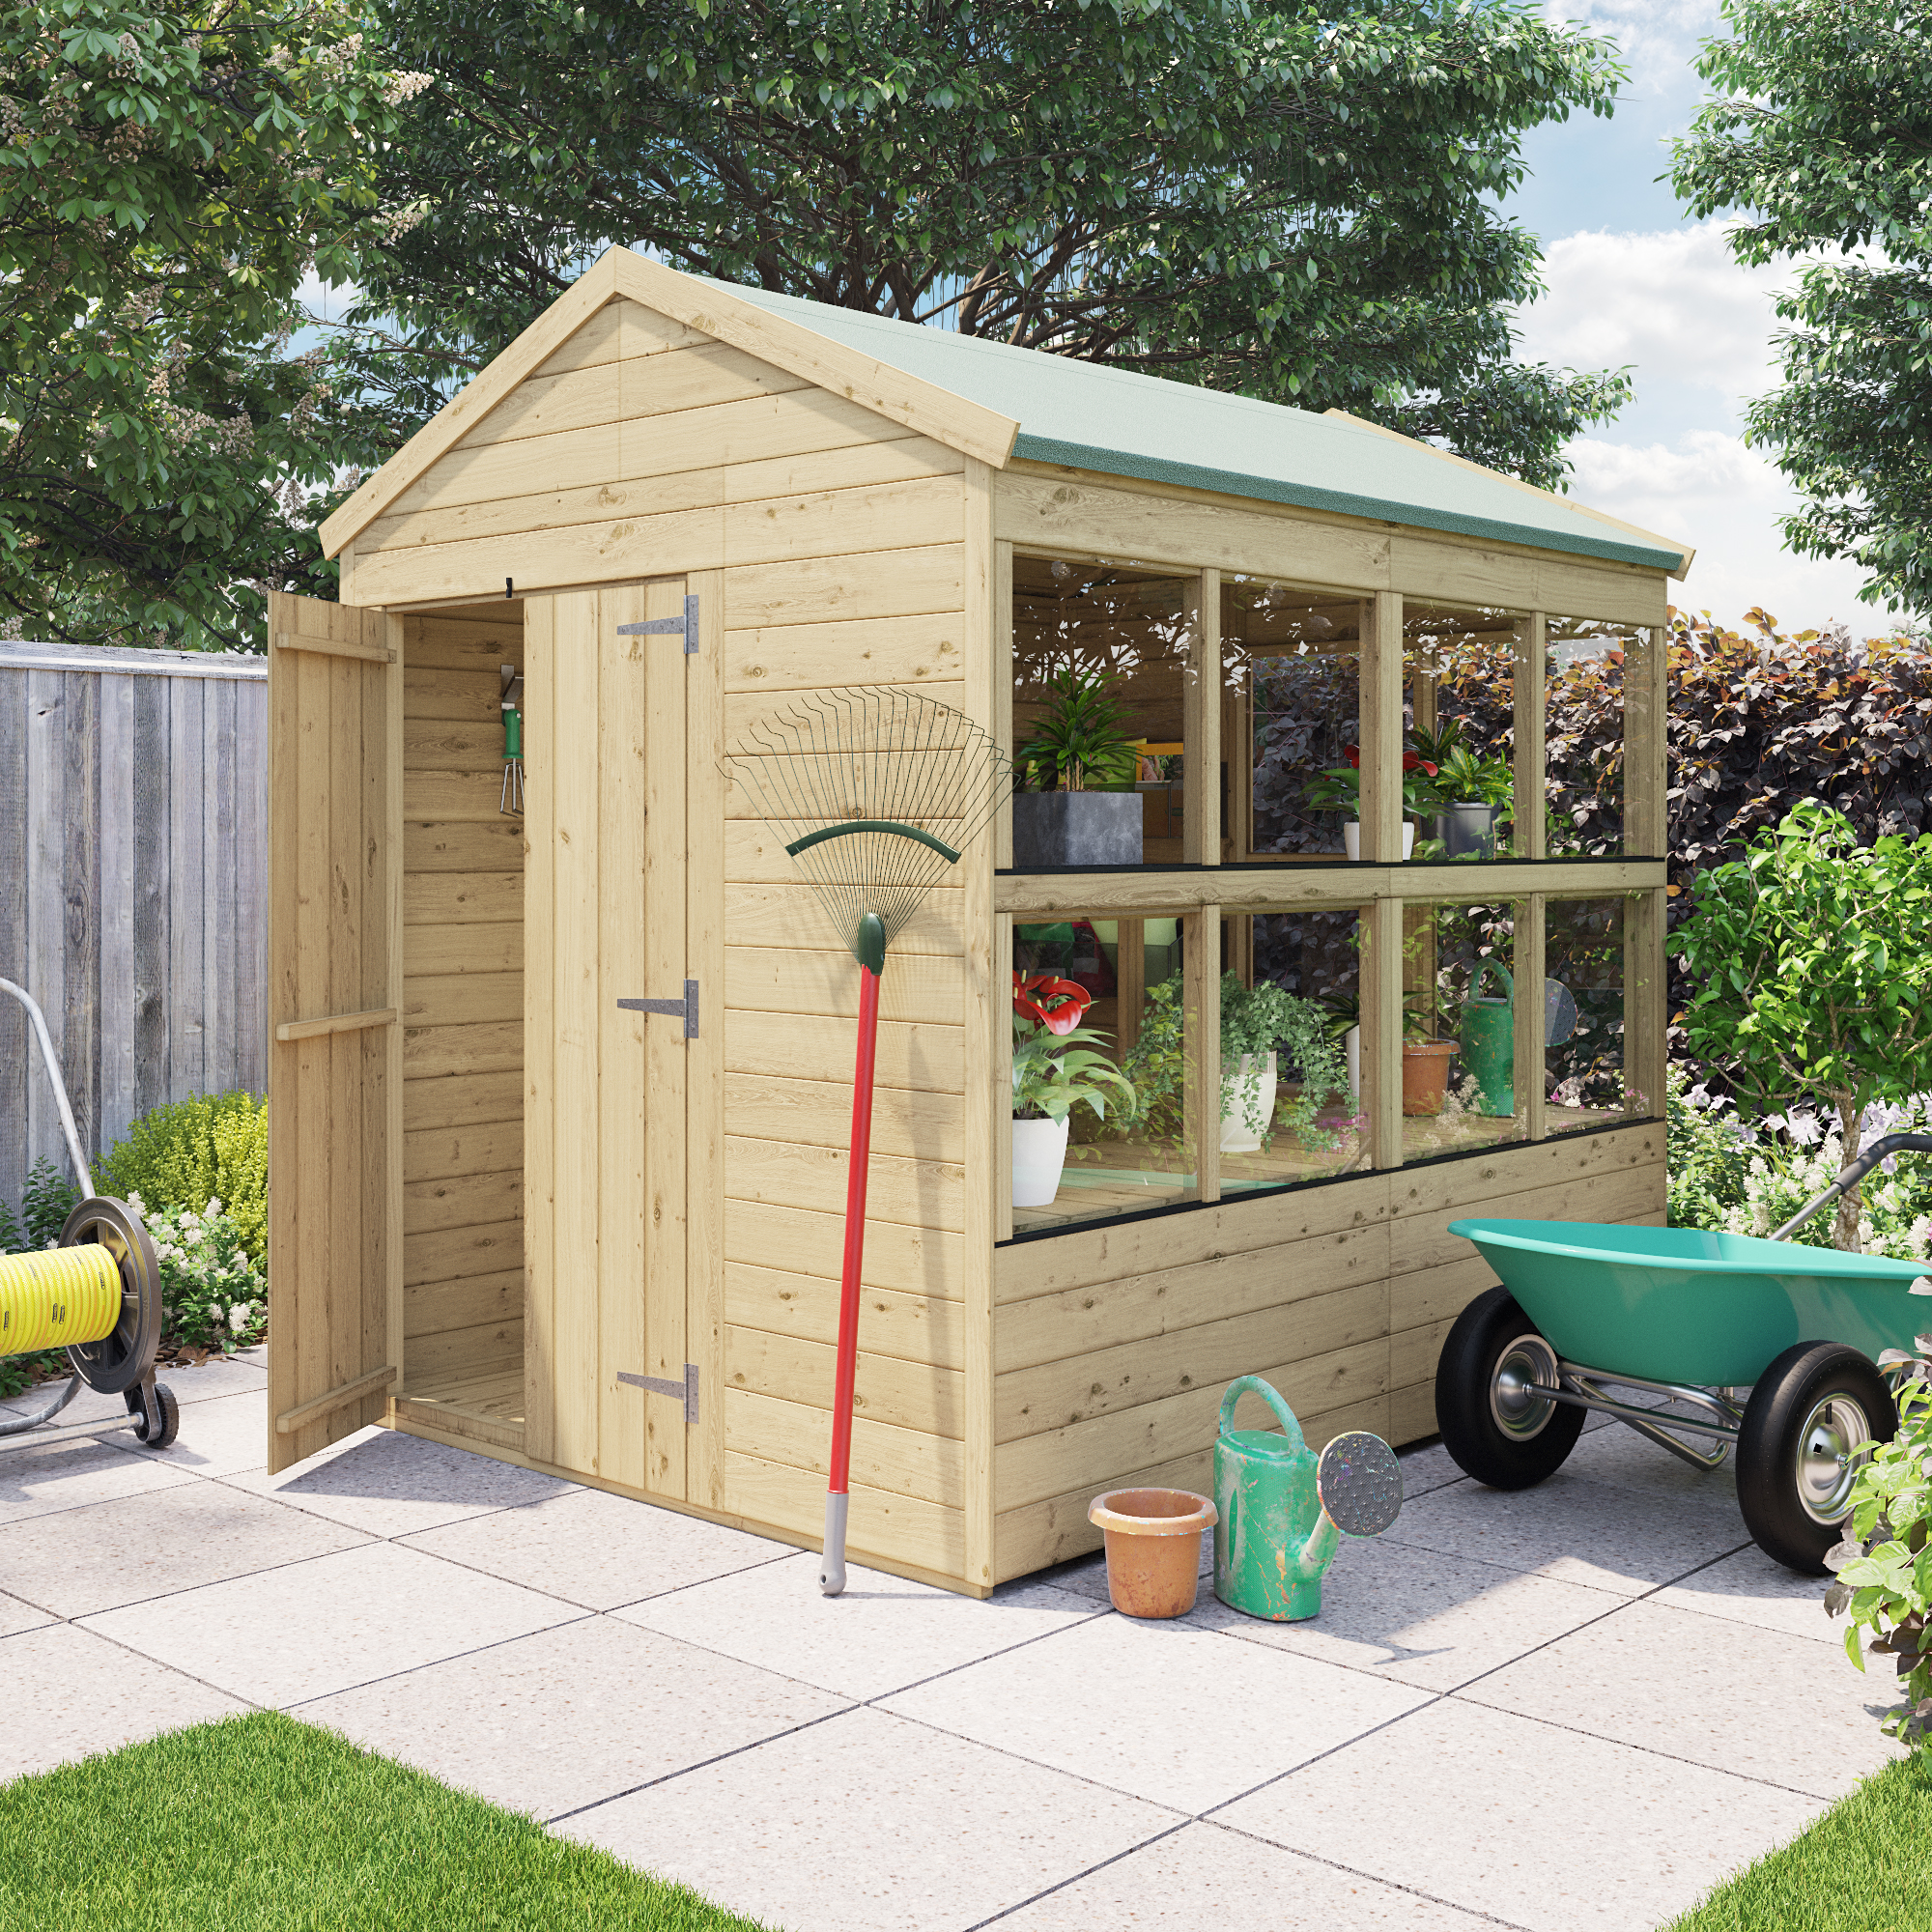 BillyOh Planthouse Tongue and Groove Apex Potting Shed - 8x6